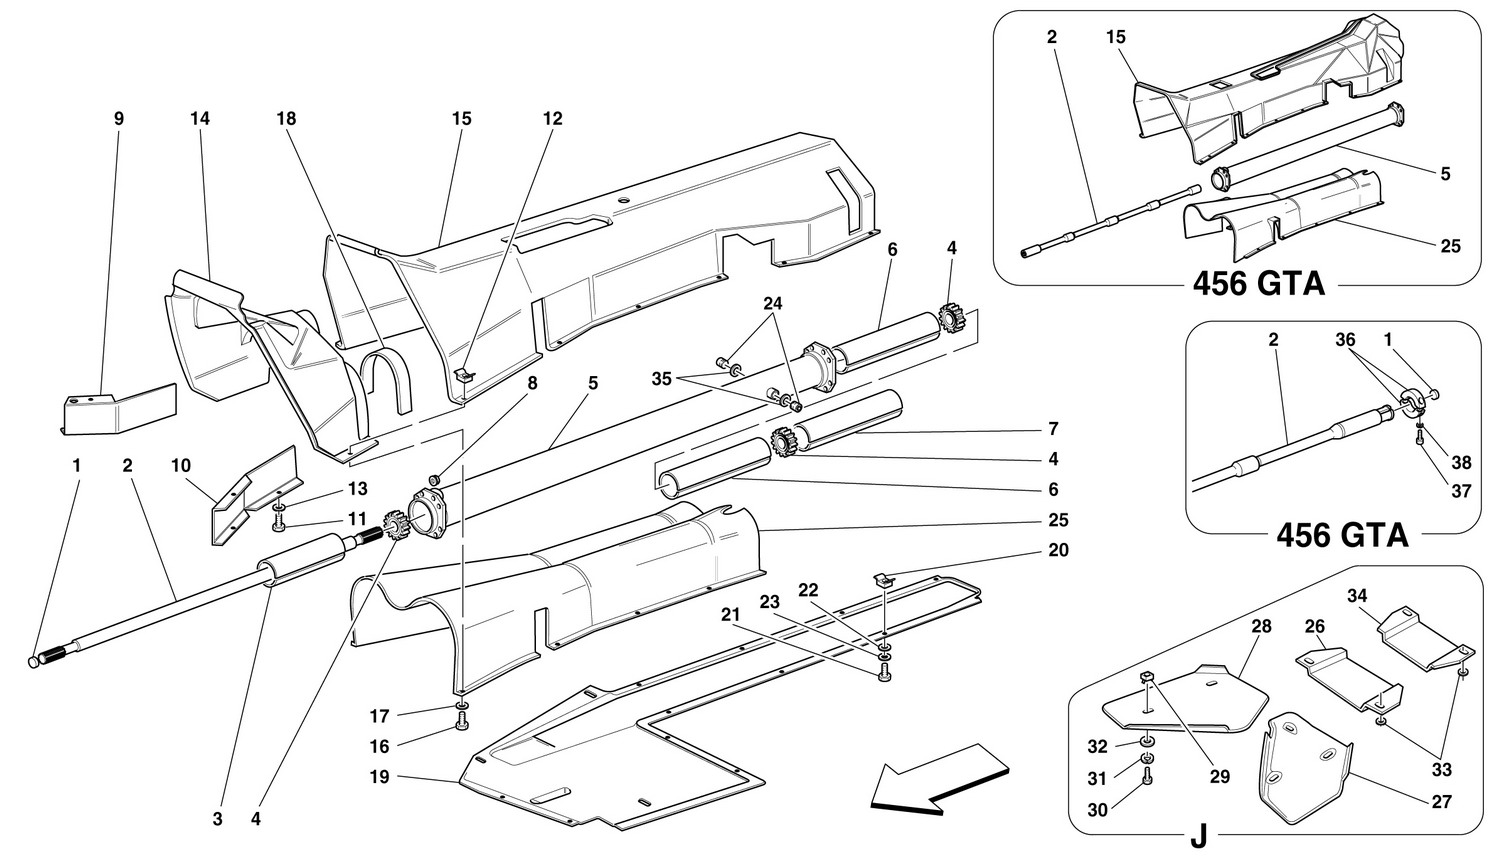 Schematic: Engine Connection Tube - Gearbox And Insulation